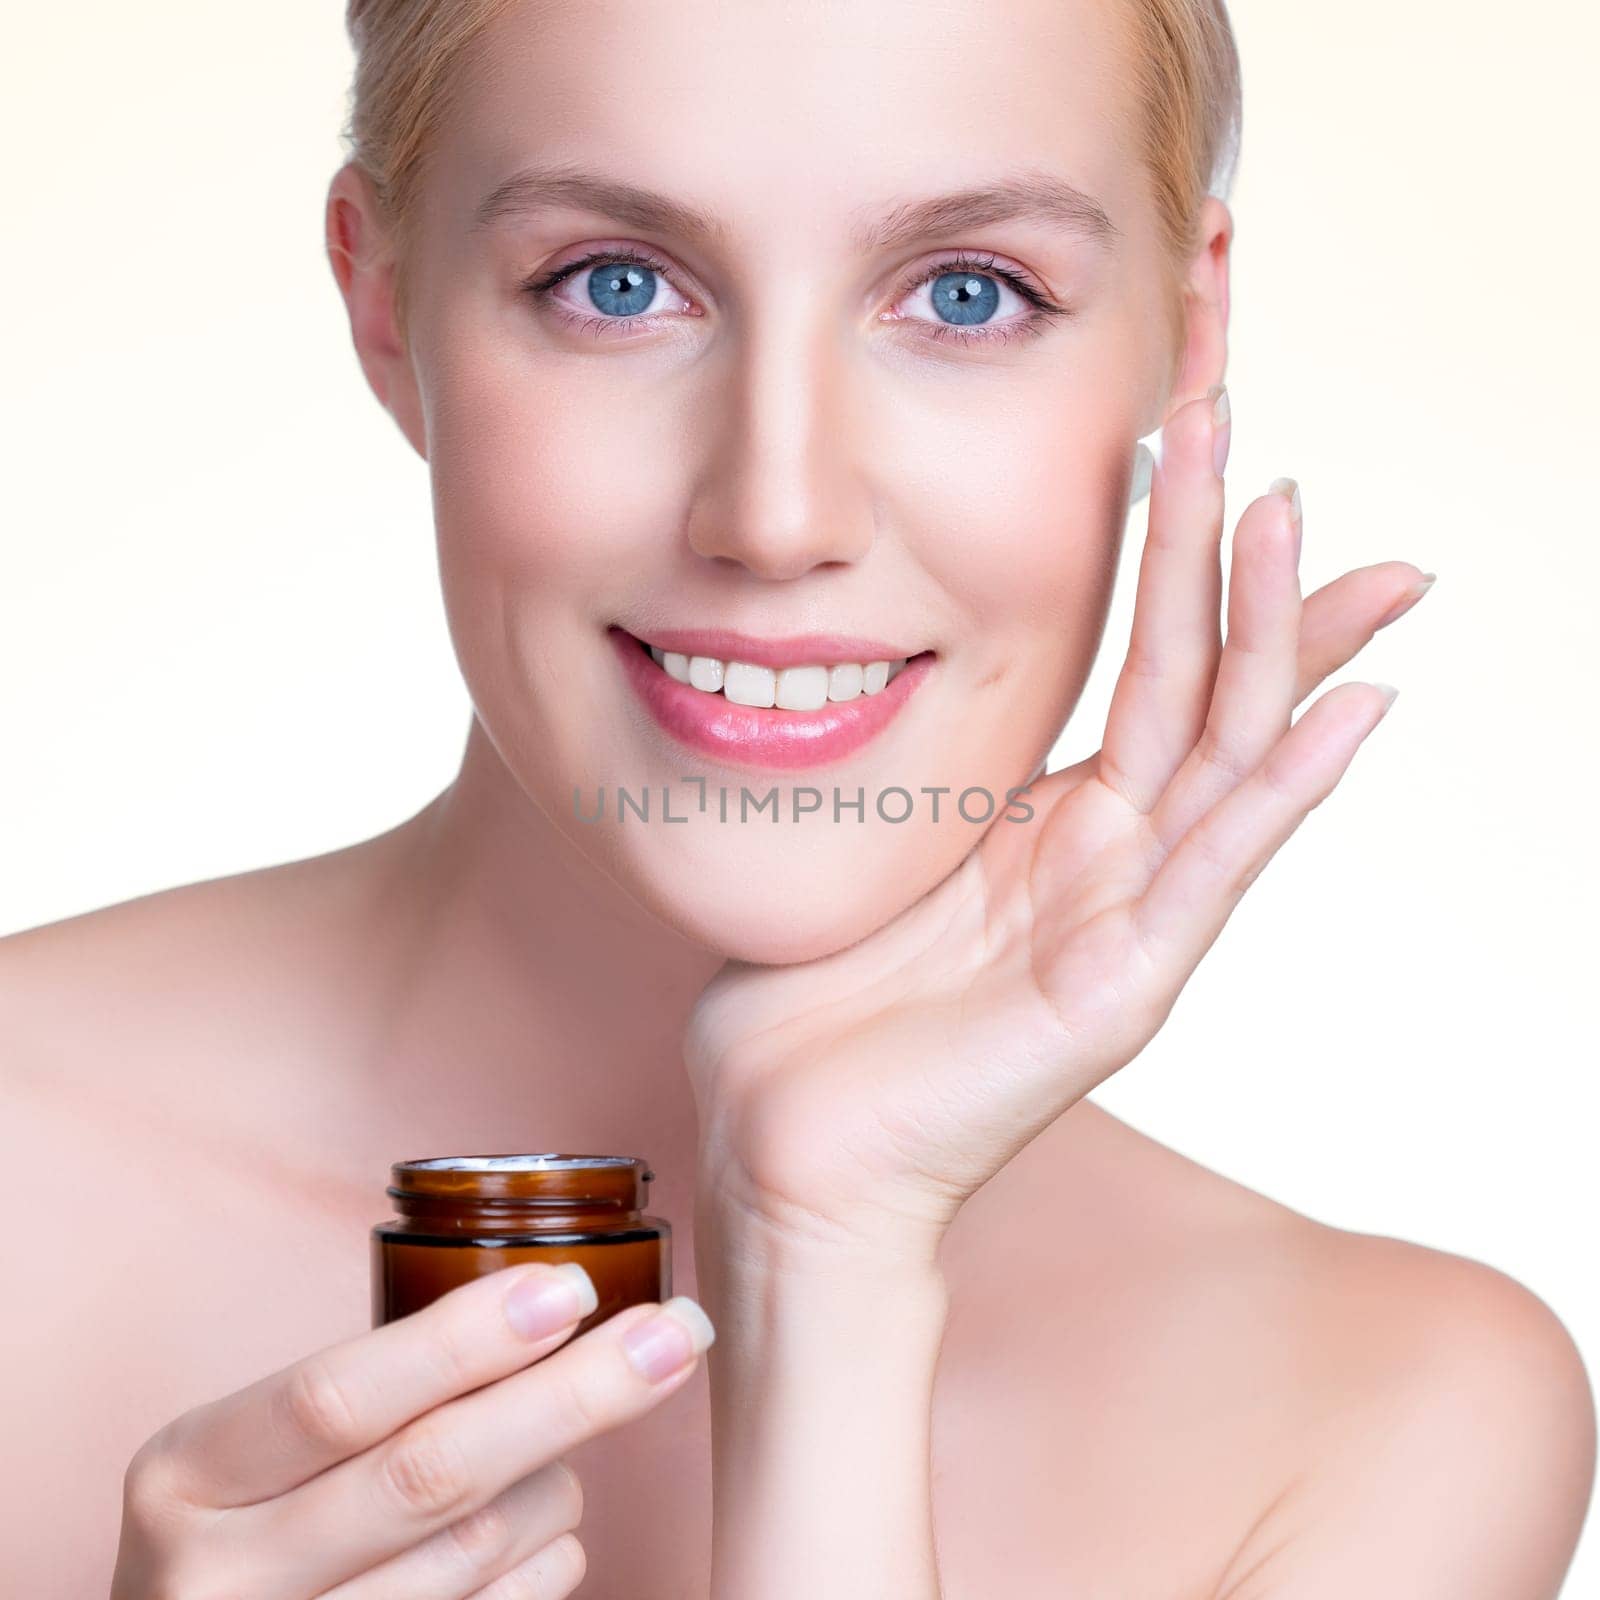 Closeup personable beautiful perfect clean skin soft makeup woman finger applying moisturizer cream on her face for anti aging wrinkle. Facial rejuvenation with expressive hand gesture putting cream.